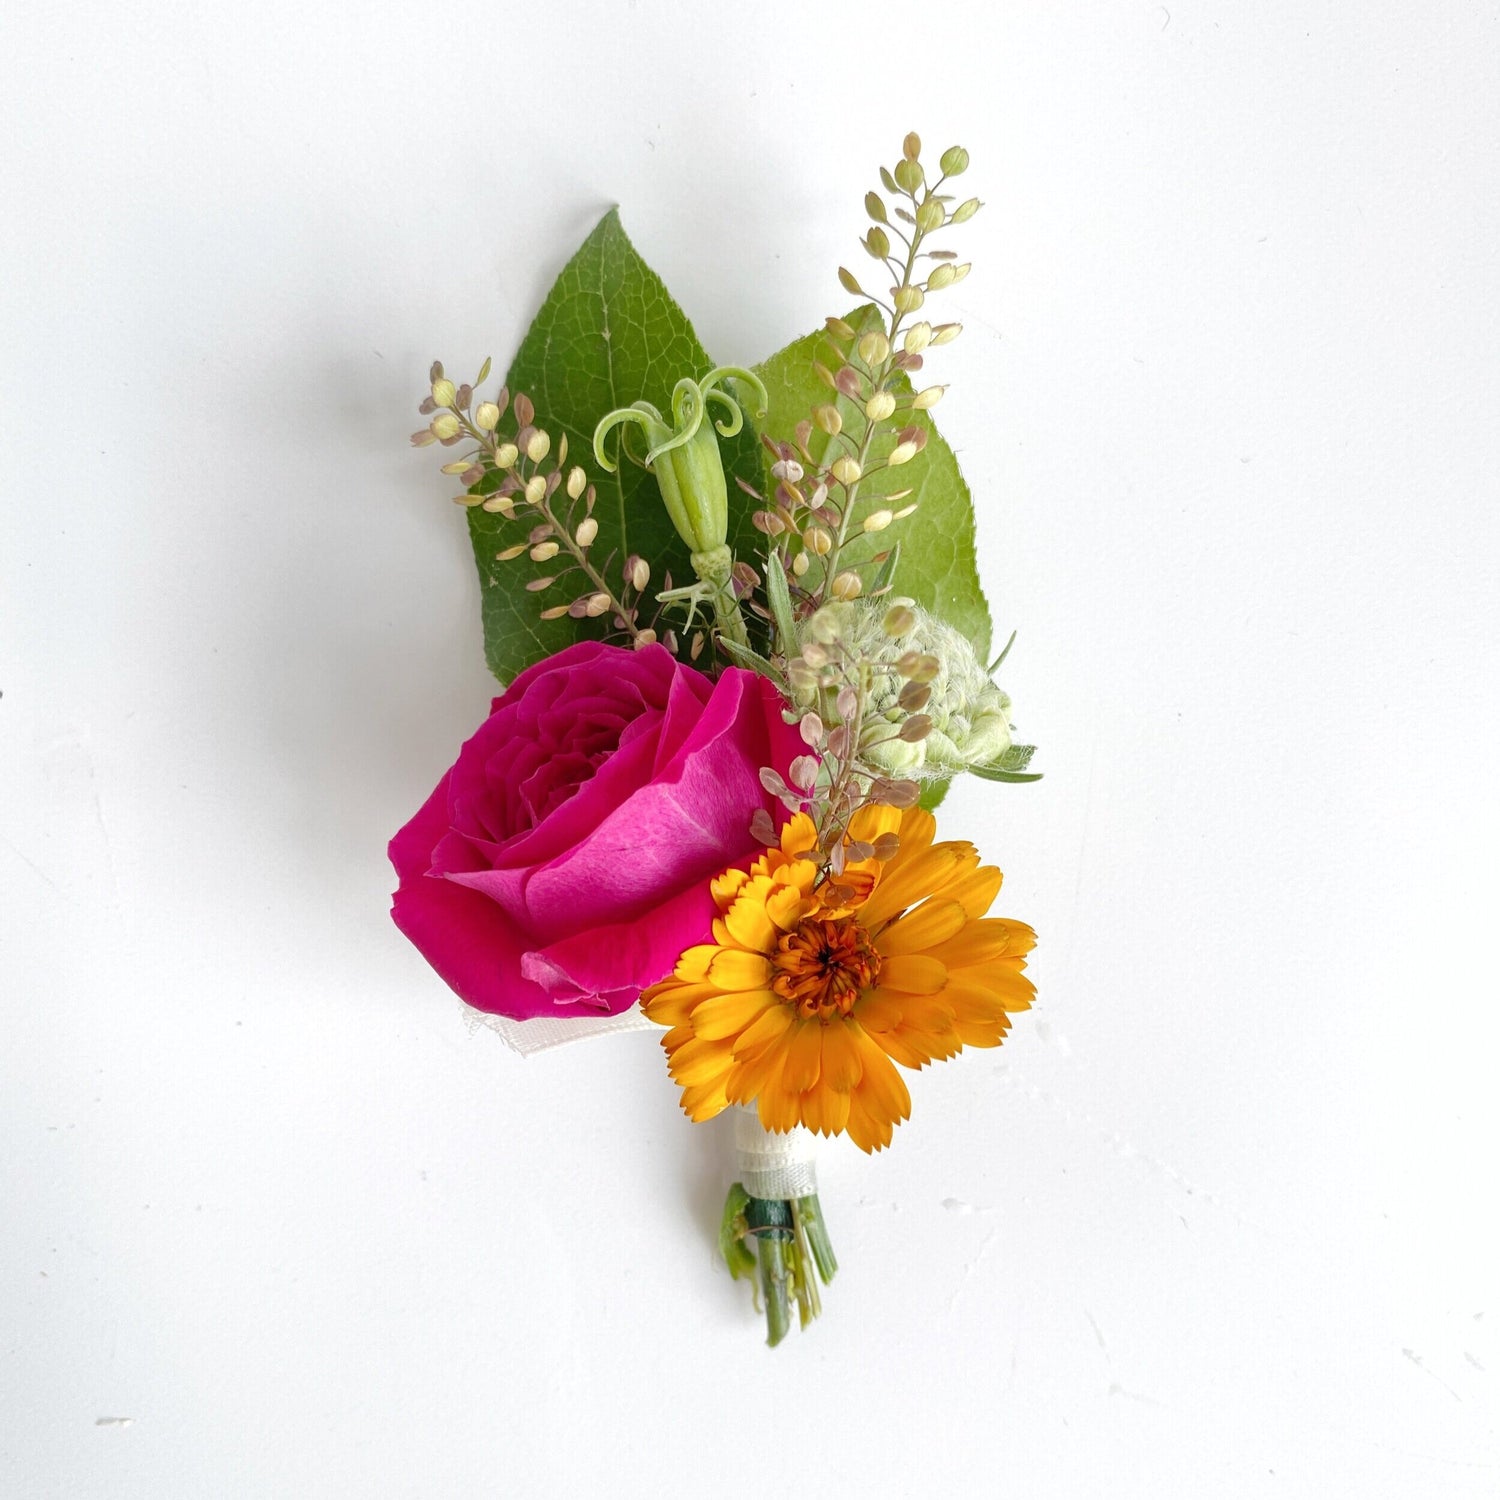 Boutonniere with red rose and yellow sunflower.  Floral arrangement completed by Everbloom Design a Memphis, Tennessee based floral studio.